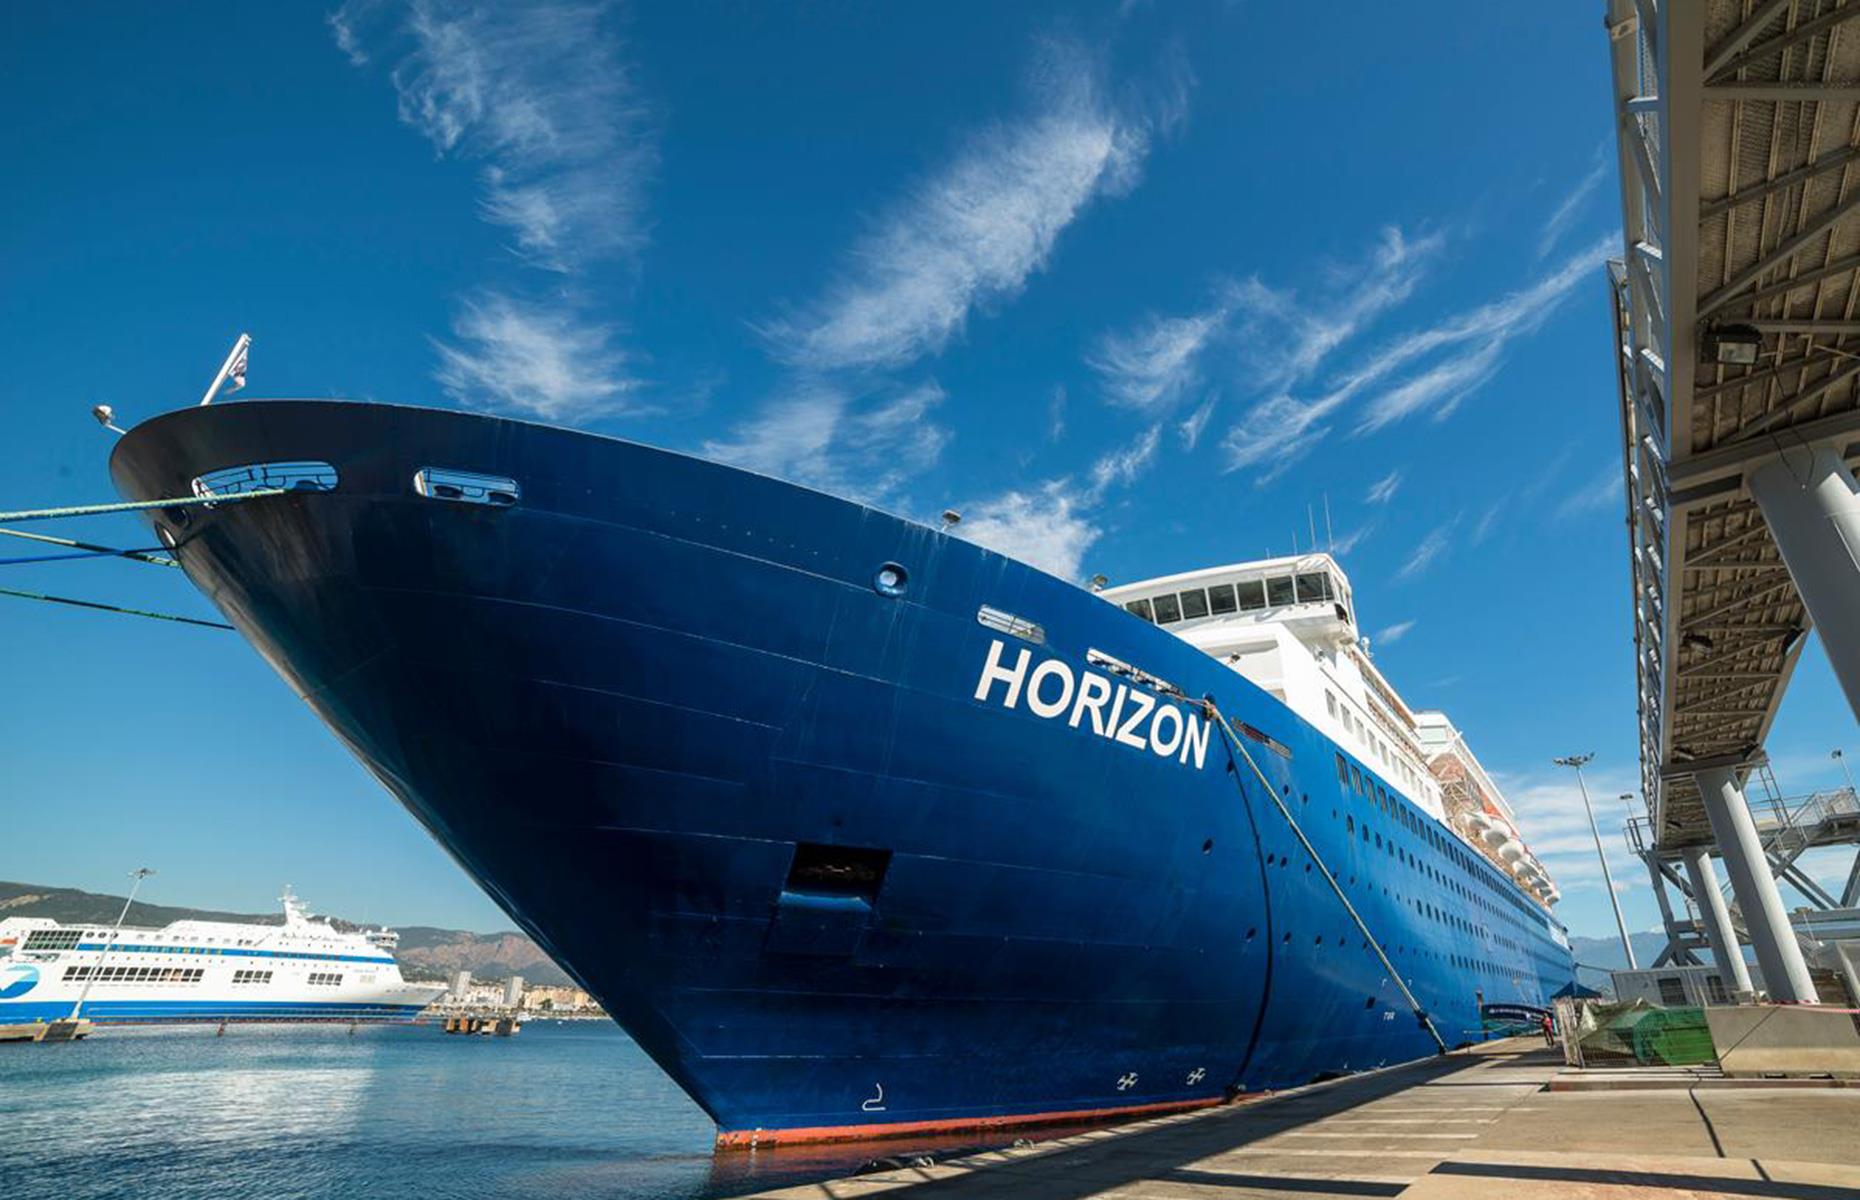 Following the collapse of Pullmantur in June 2020, Royal Caribbean announced that Horizon would be scrapped. The ship is currently anchored in Greece with no further news about its future.